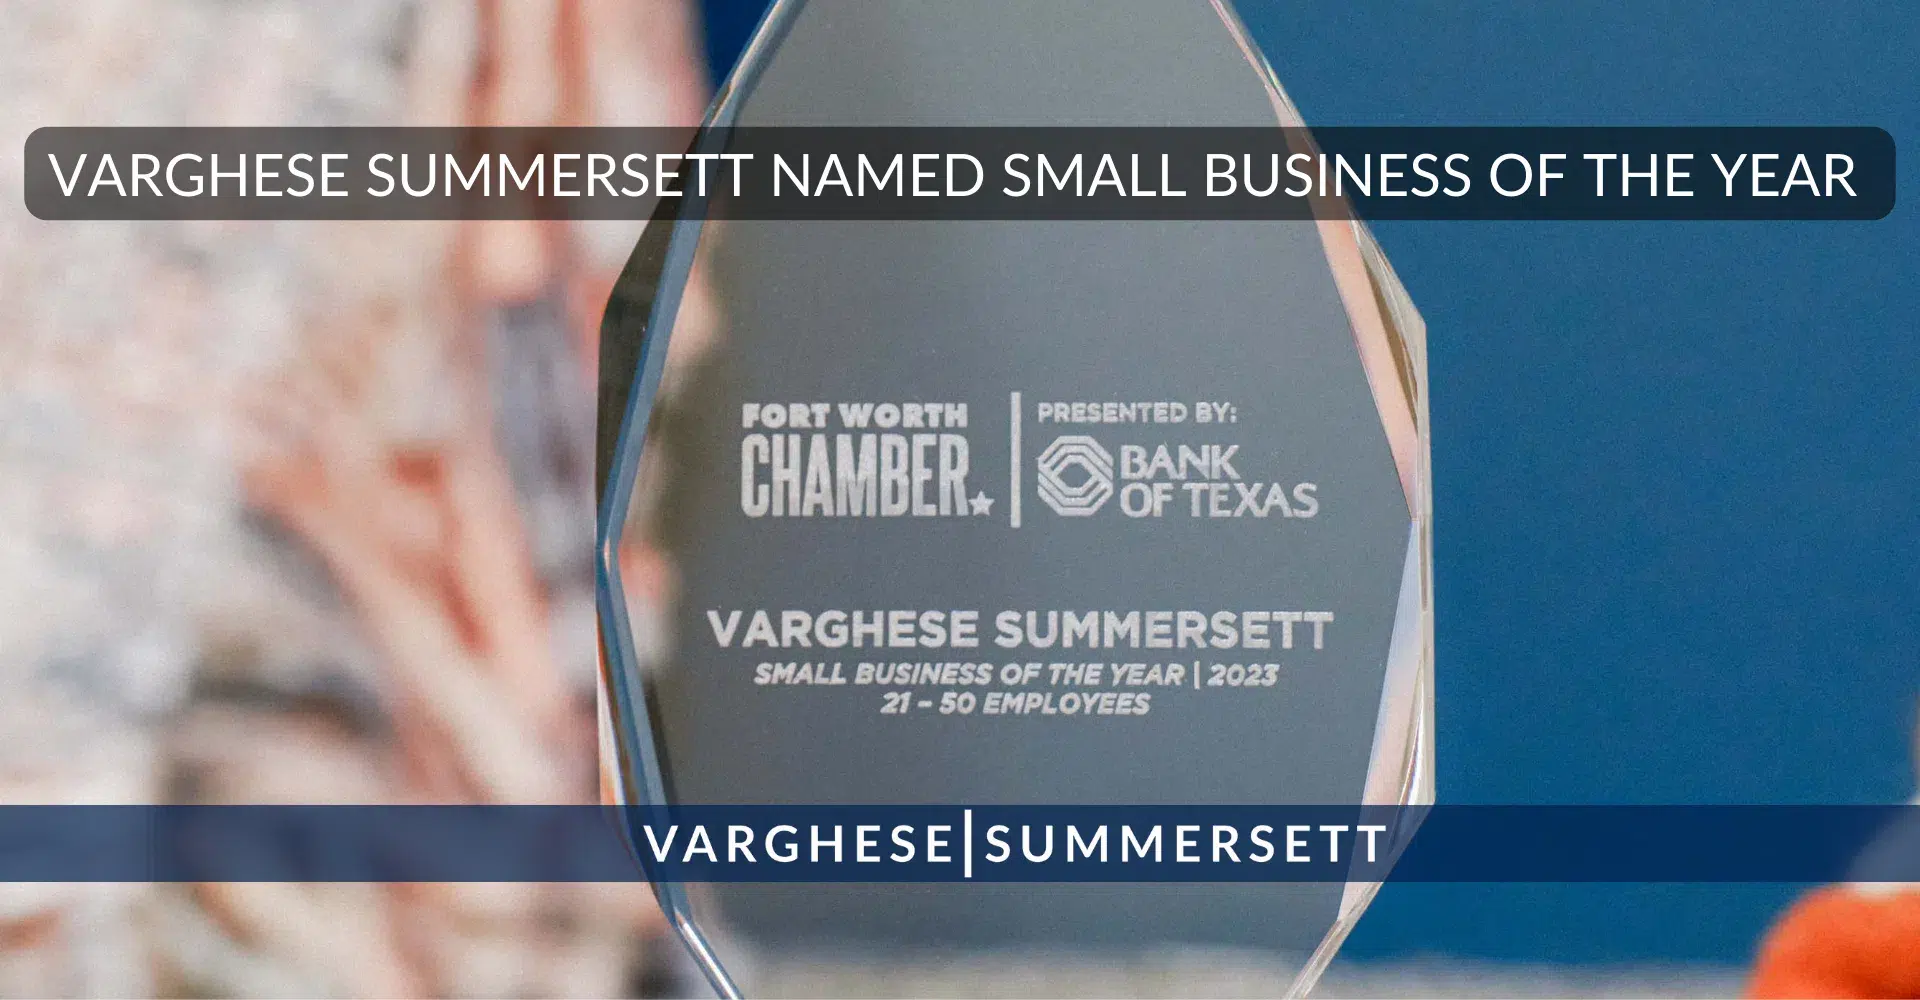 VARGHESE SUMMERSETT NAMED SMALL BUSINESS OF THE YEAR